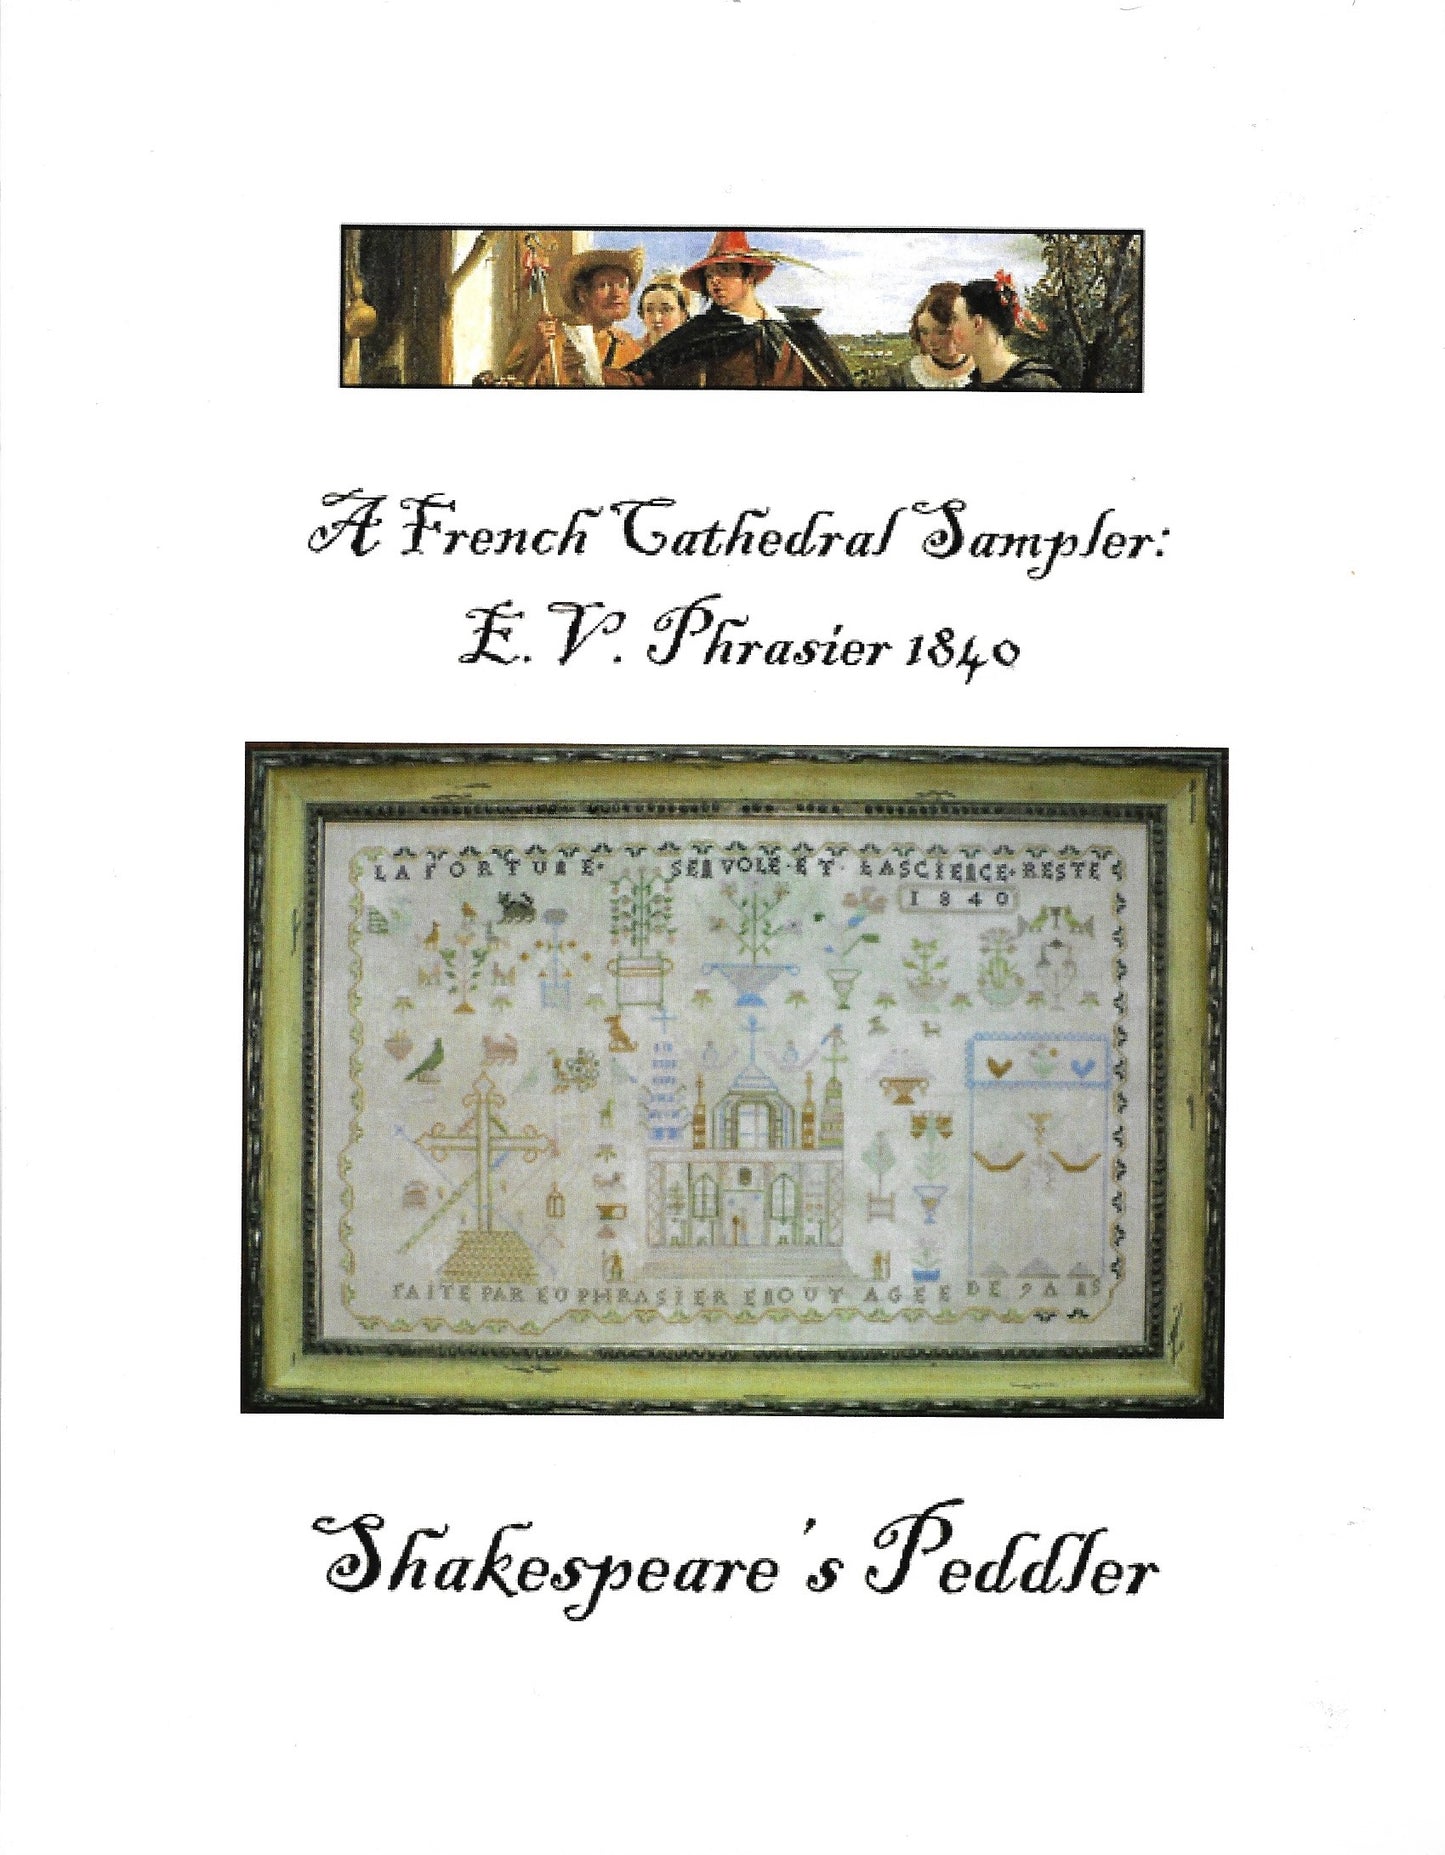 Shakespear's Peddler A French Cathedral Sampler cross stitch pattern